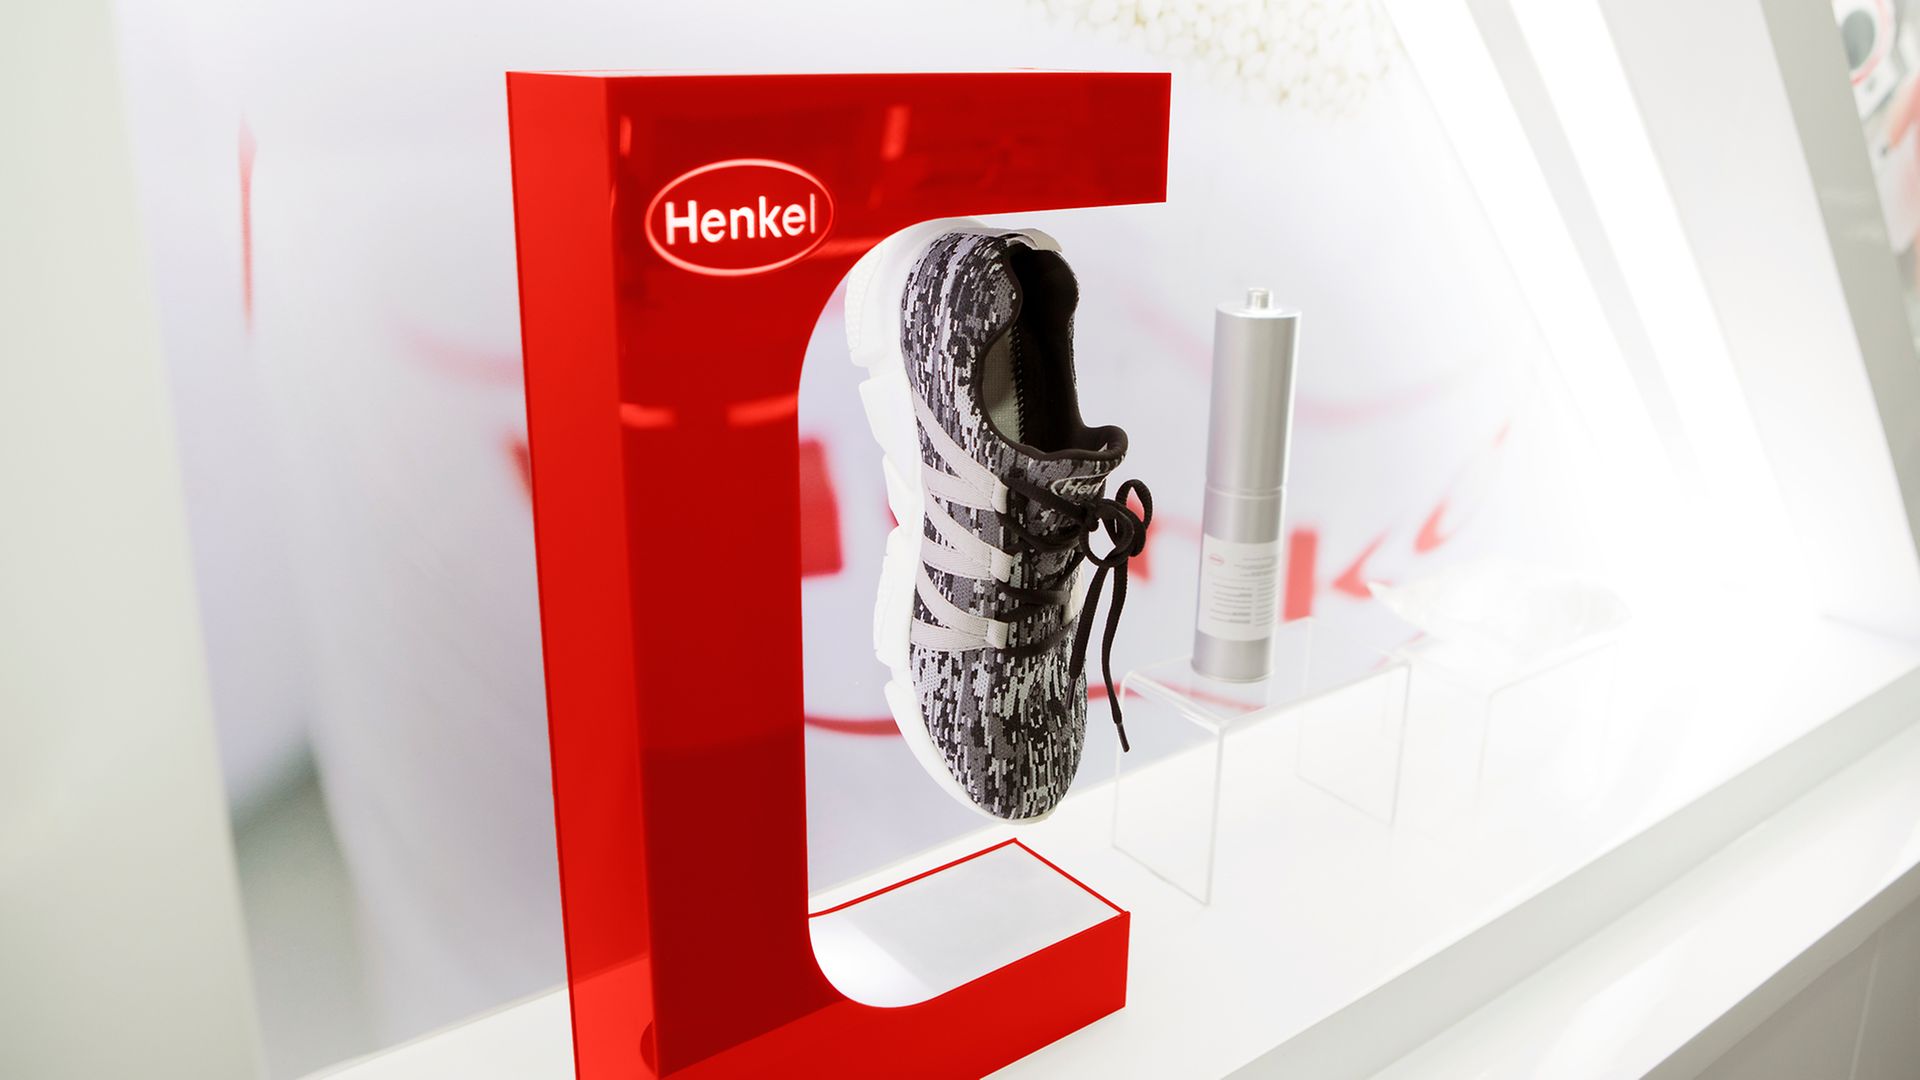 In Vietnam, Henkel is a leading supplier of high-performance adhesives in the footwear industry.